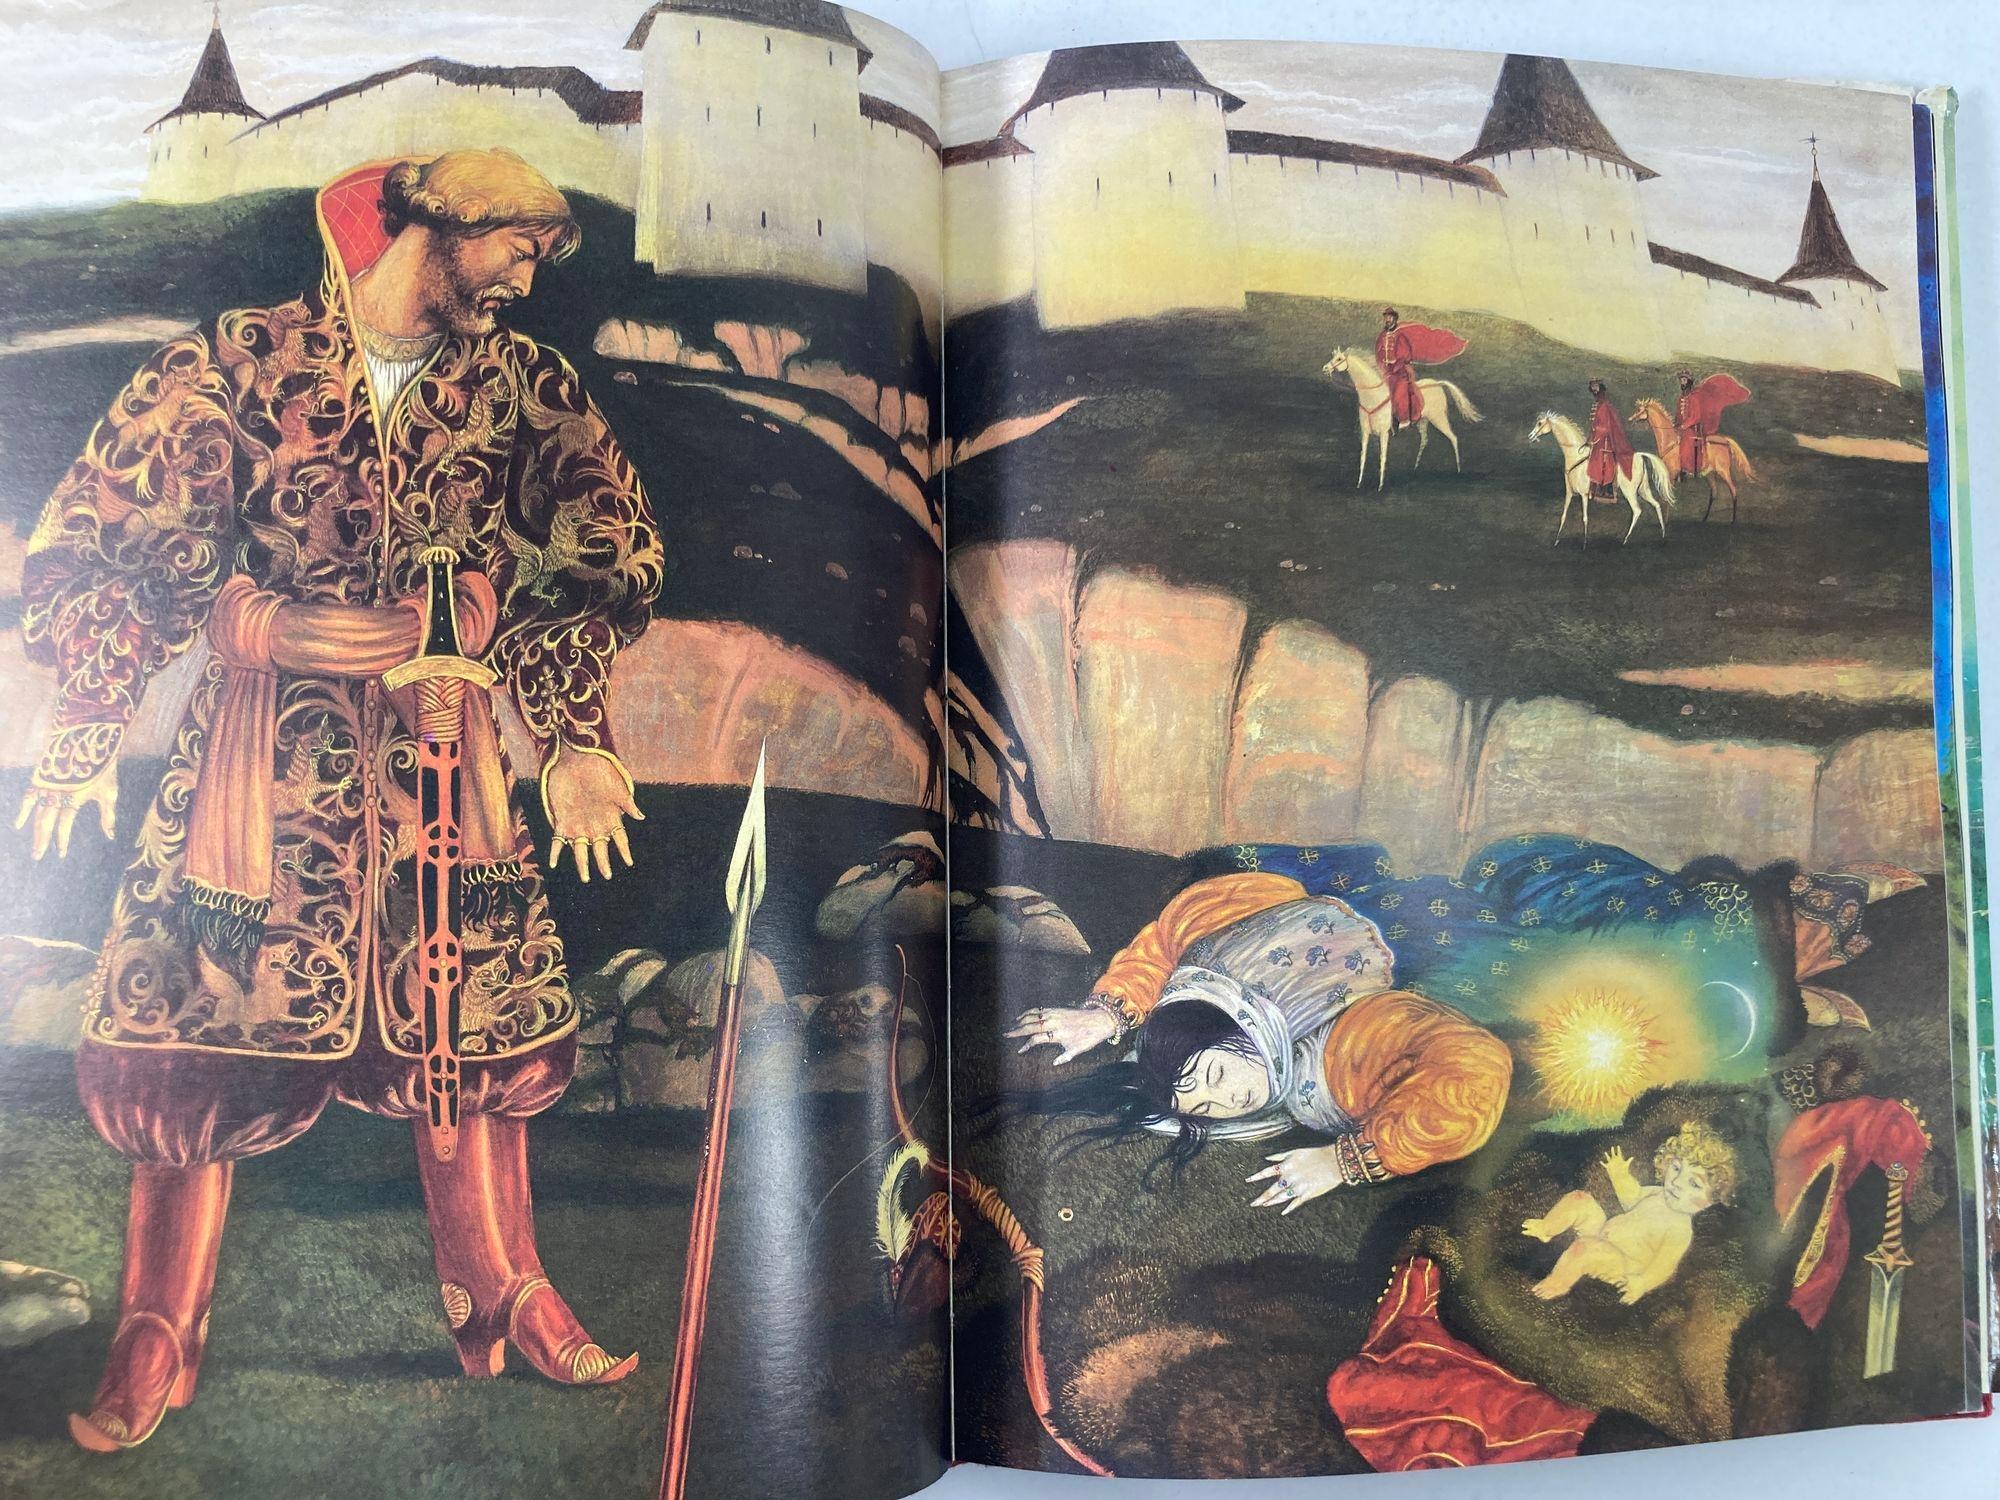 Heroes Monsters & Other Worlds from Russian Mythology Hardcover Book 1985 1st Ed en vente 3